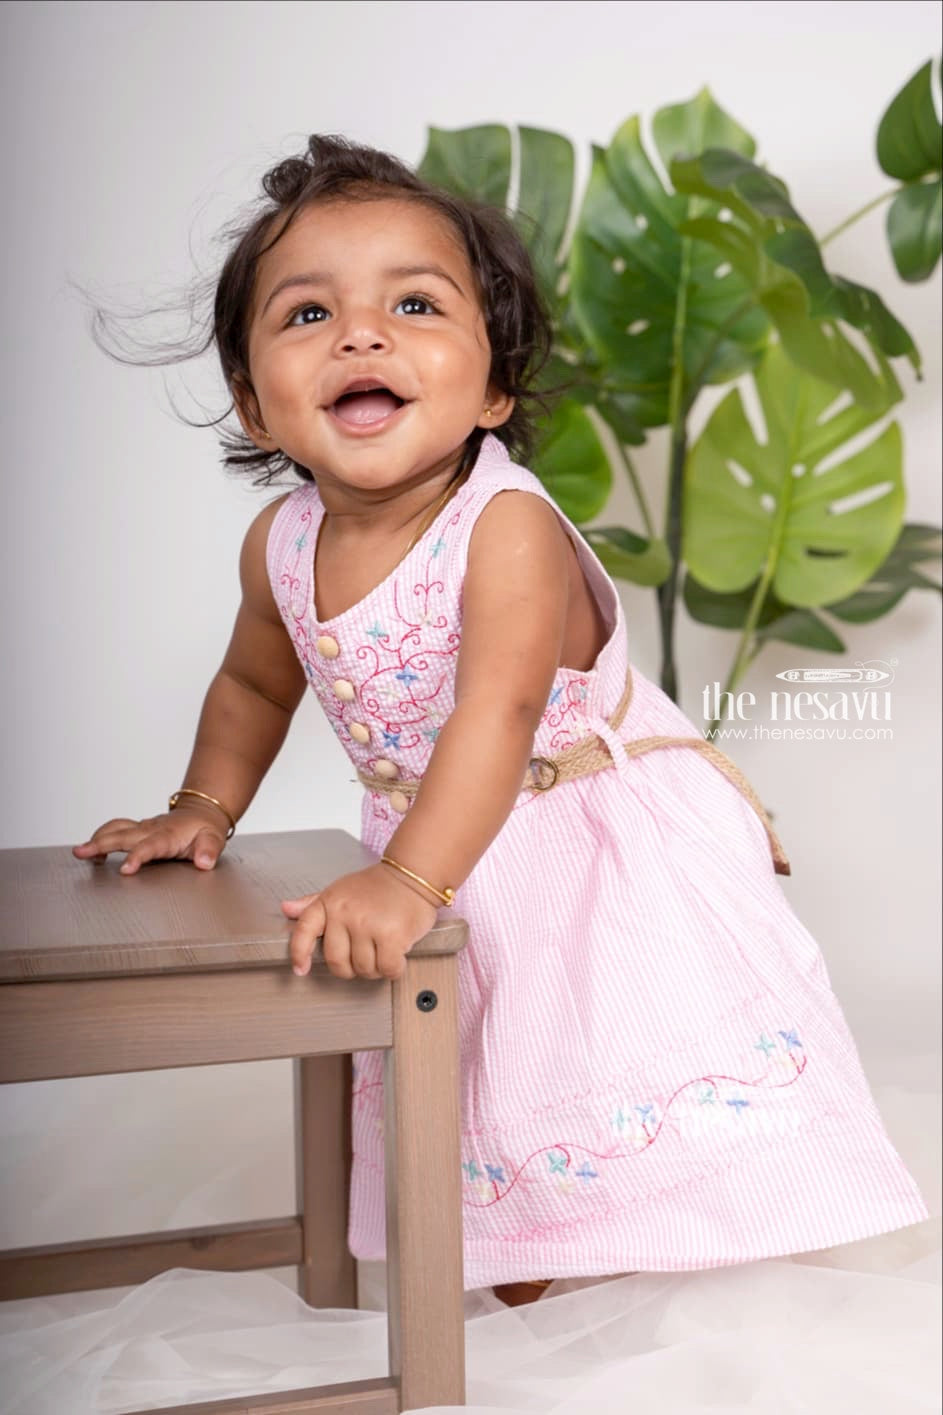 The Nesavu Baby Cotton Frocks Baby Pink Cotton Frock With Designer Hip Belt For New Born Baby Girls Nesavu Soft Cotton Frocks For 8 Months Baby Girls | Baby Pink Frock Ideas | The Nesavu